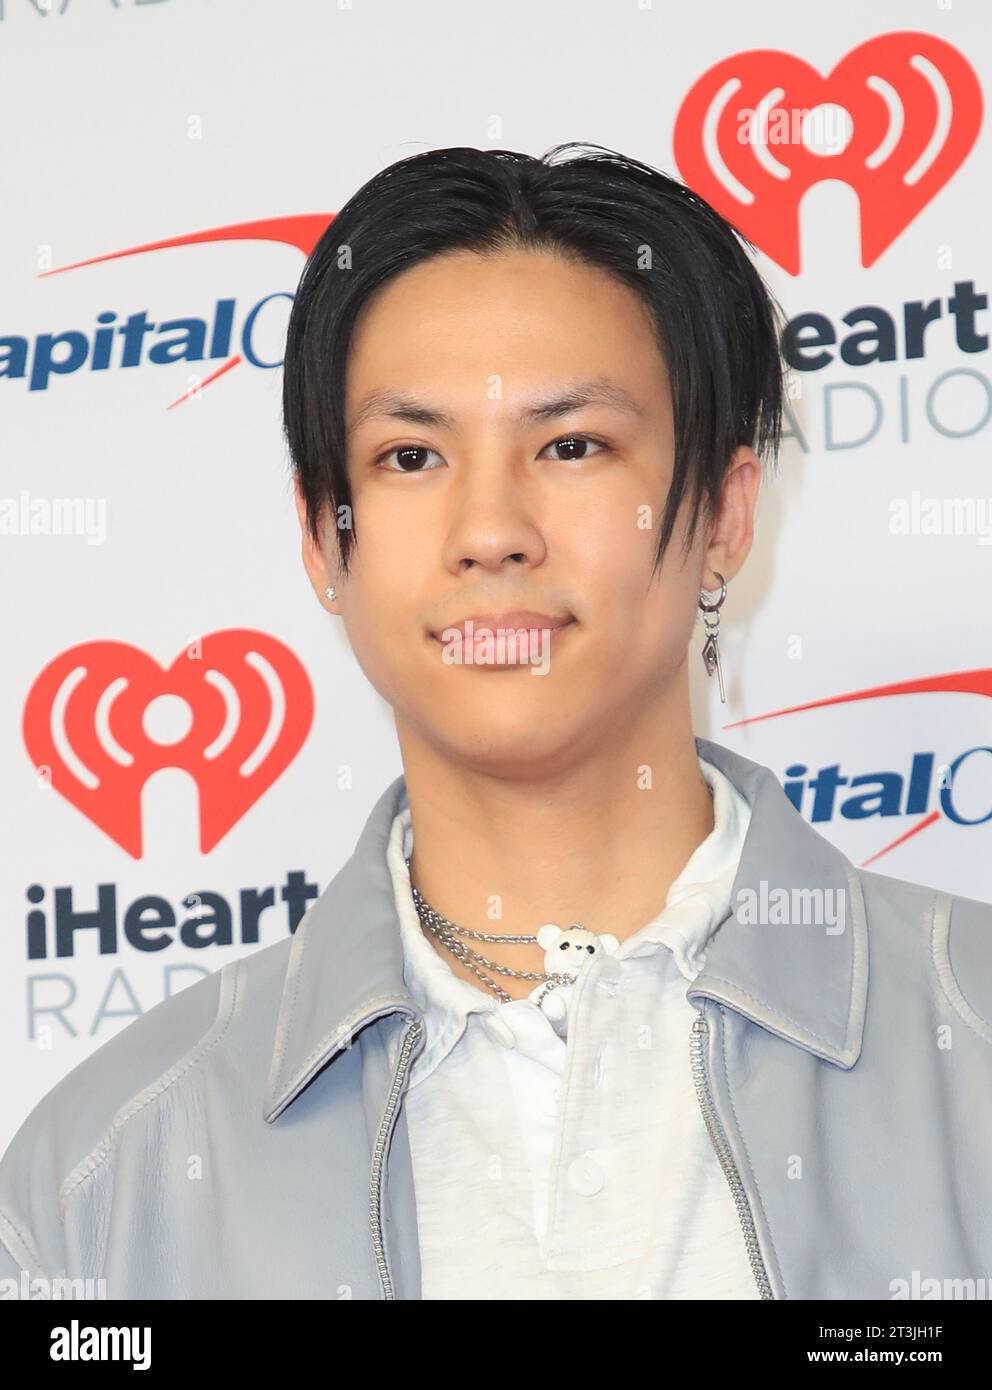 2023 iHeartRadio Music Festival Red Carpet Saturday Arrivals at T-Mobile Arena, Las Vegas, NV Featuring: Kevin Li Where: Las Vegas, Nevada, United States When: 23 Sep 2023 Credit: Judy Eddy/WENN Stock Photo